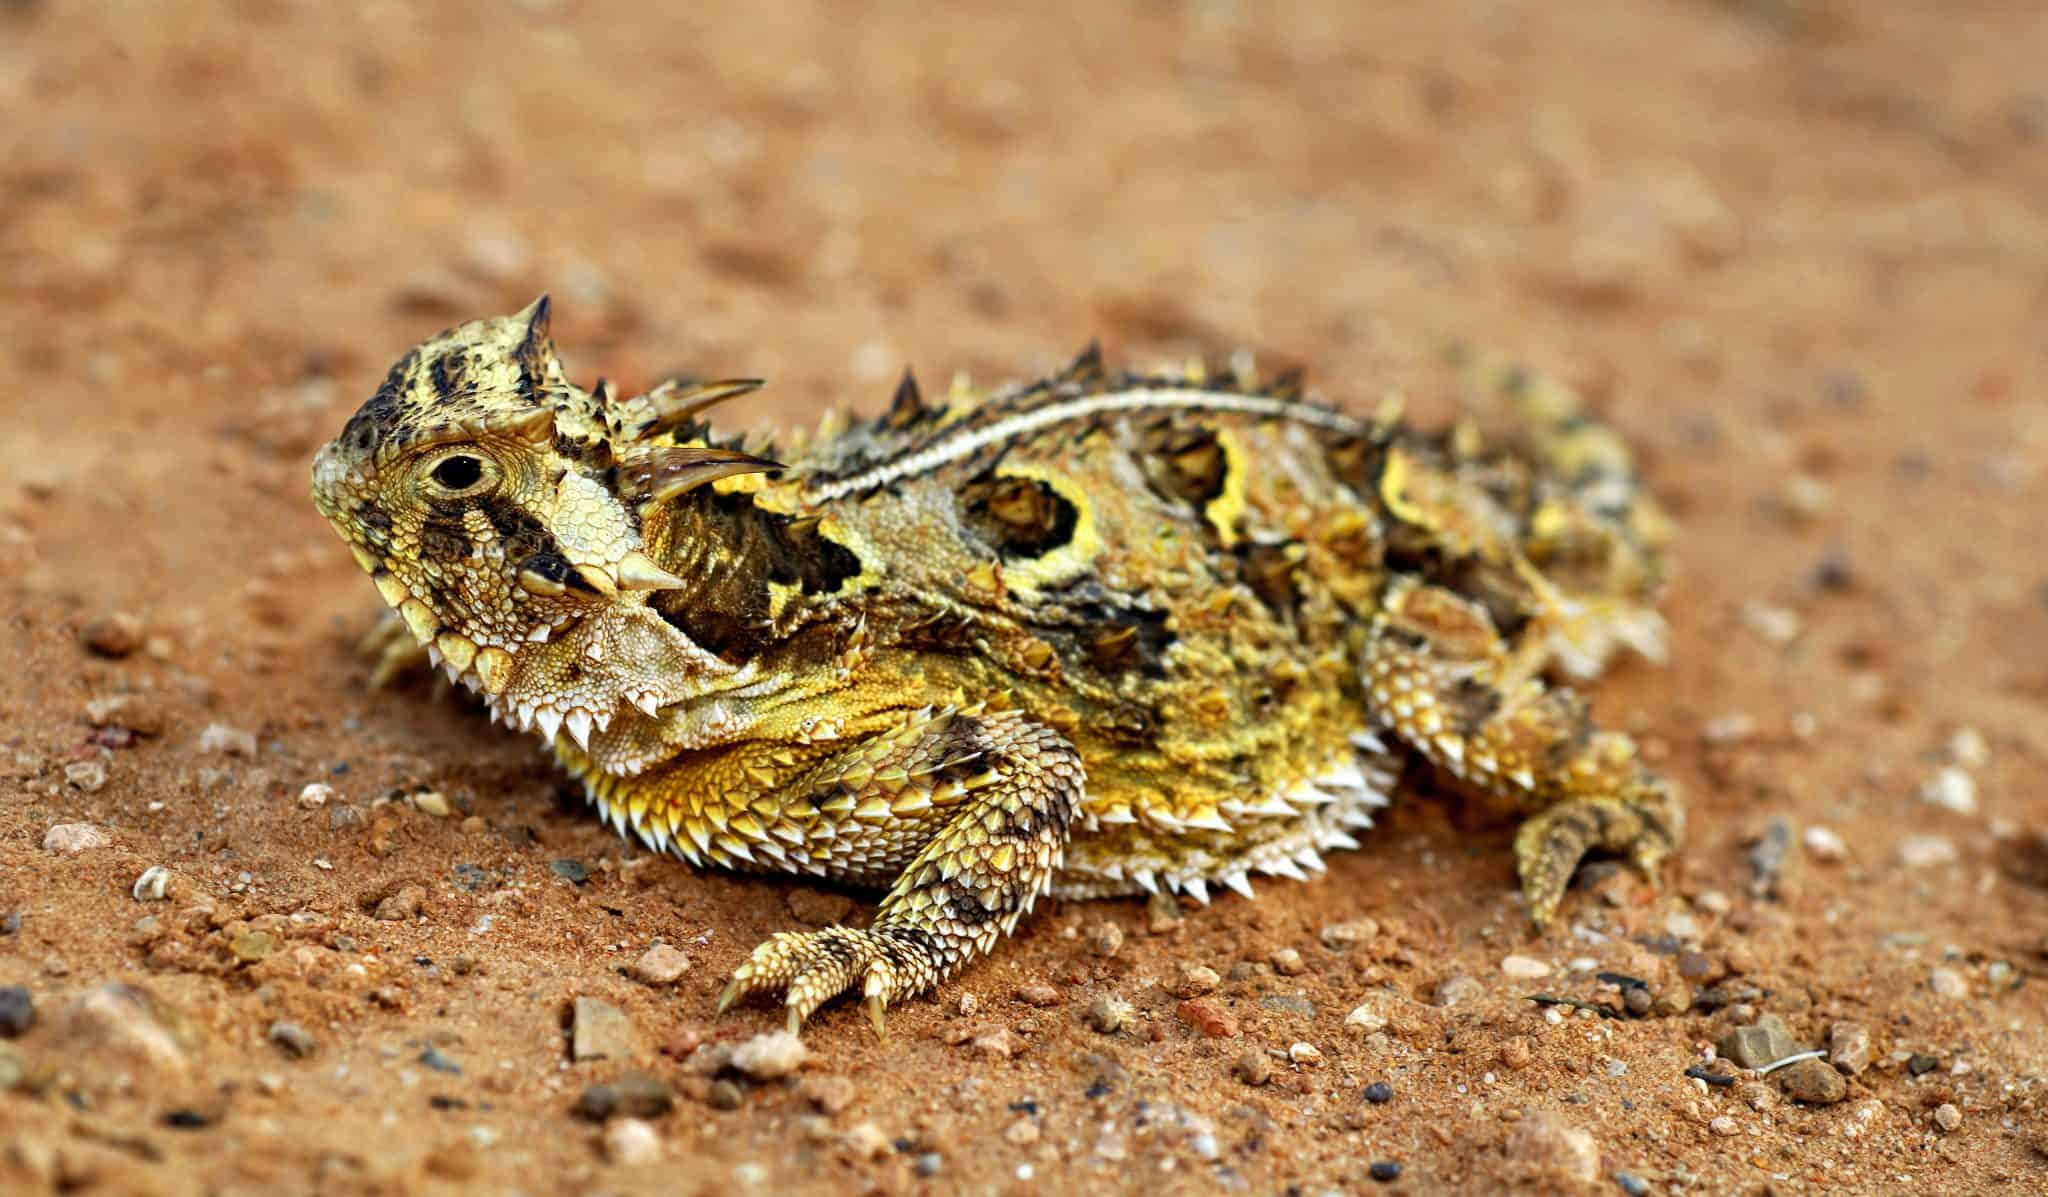 45 Texas Lizards That Are Native to the Lone Star State